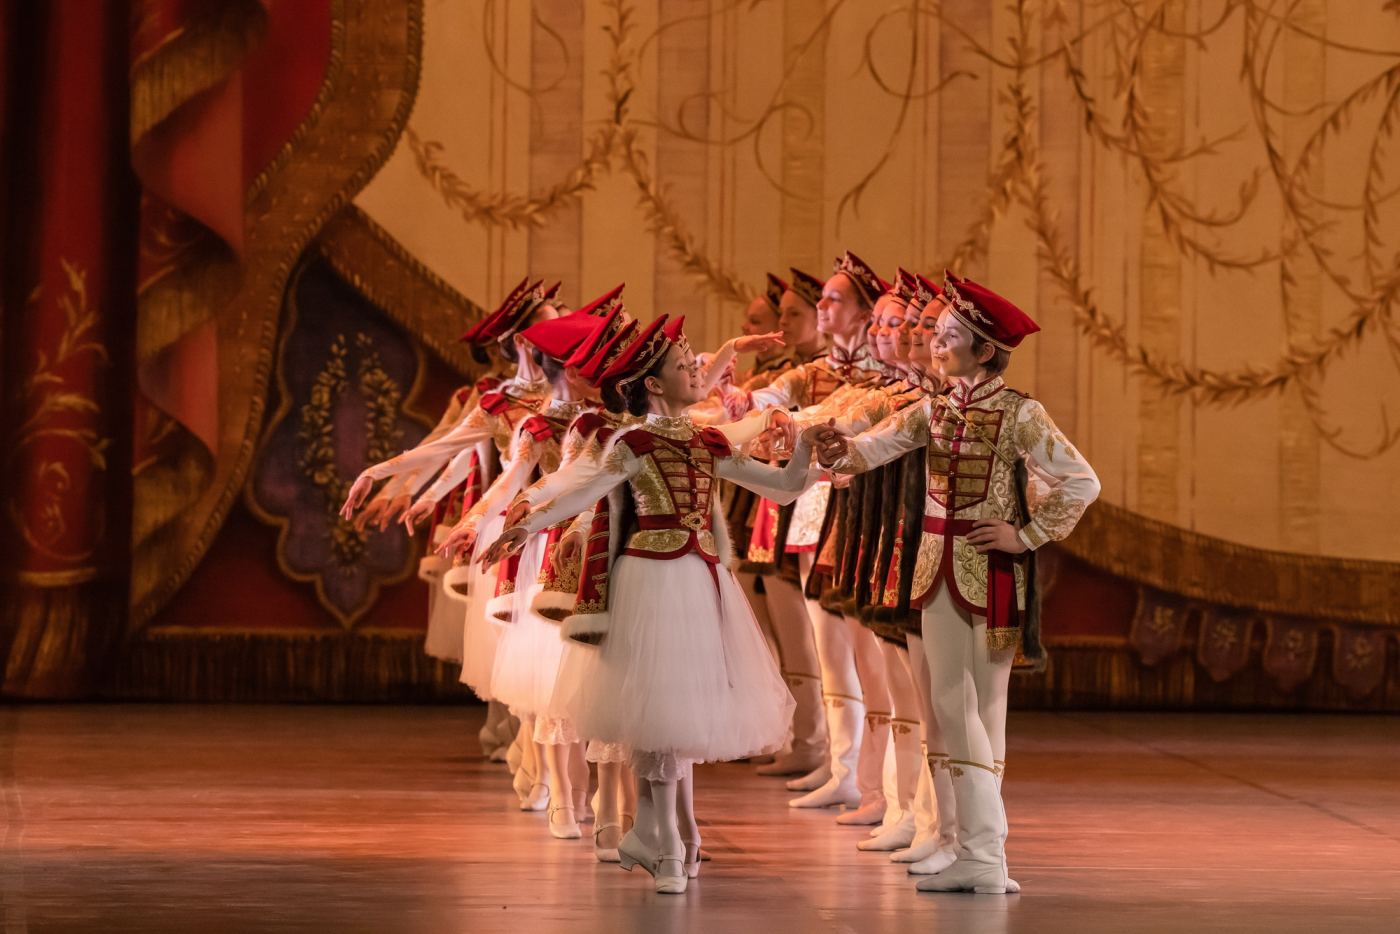 15. Students from the Hungarian National Ballet Institute, “Paquita Suite” by T.Solymosi, A.Mirzoyan, and I.Prokofieva after M.Petipa; Ballet of the Hungarian State Opera 2022 © A.Nagy / Hungarian State Opera 